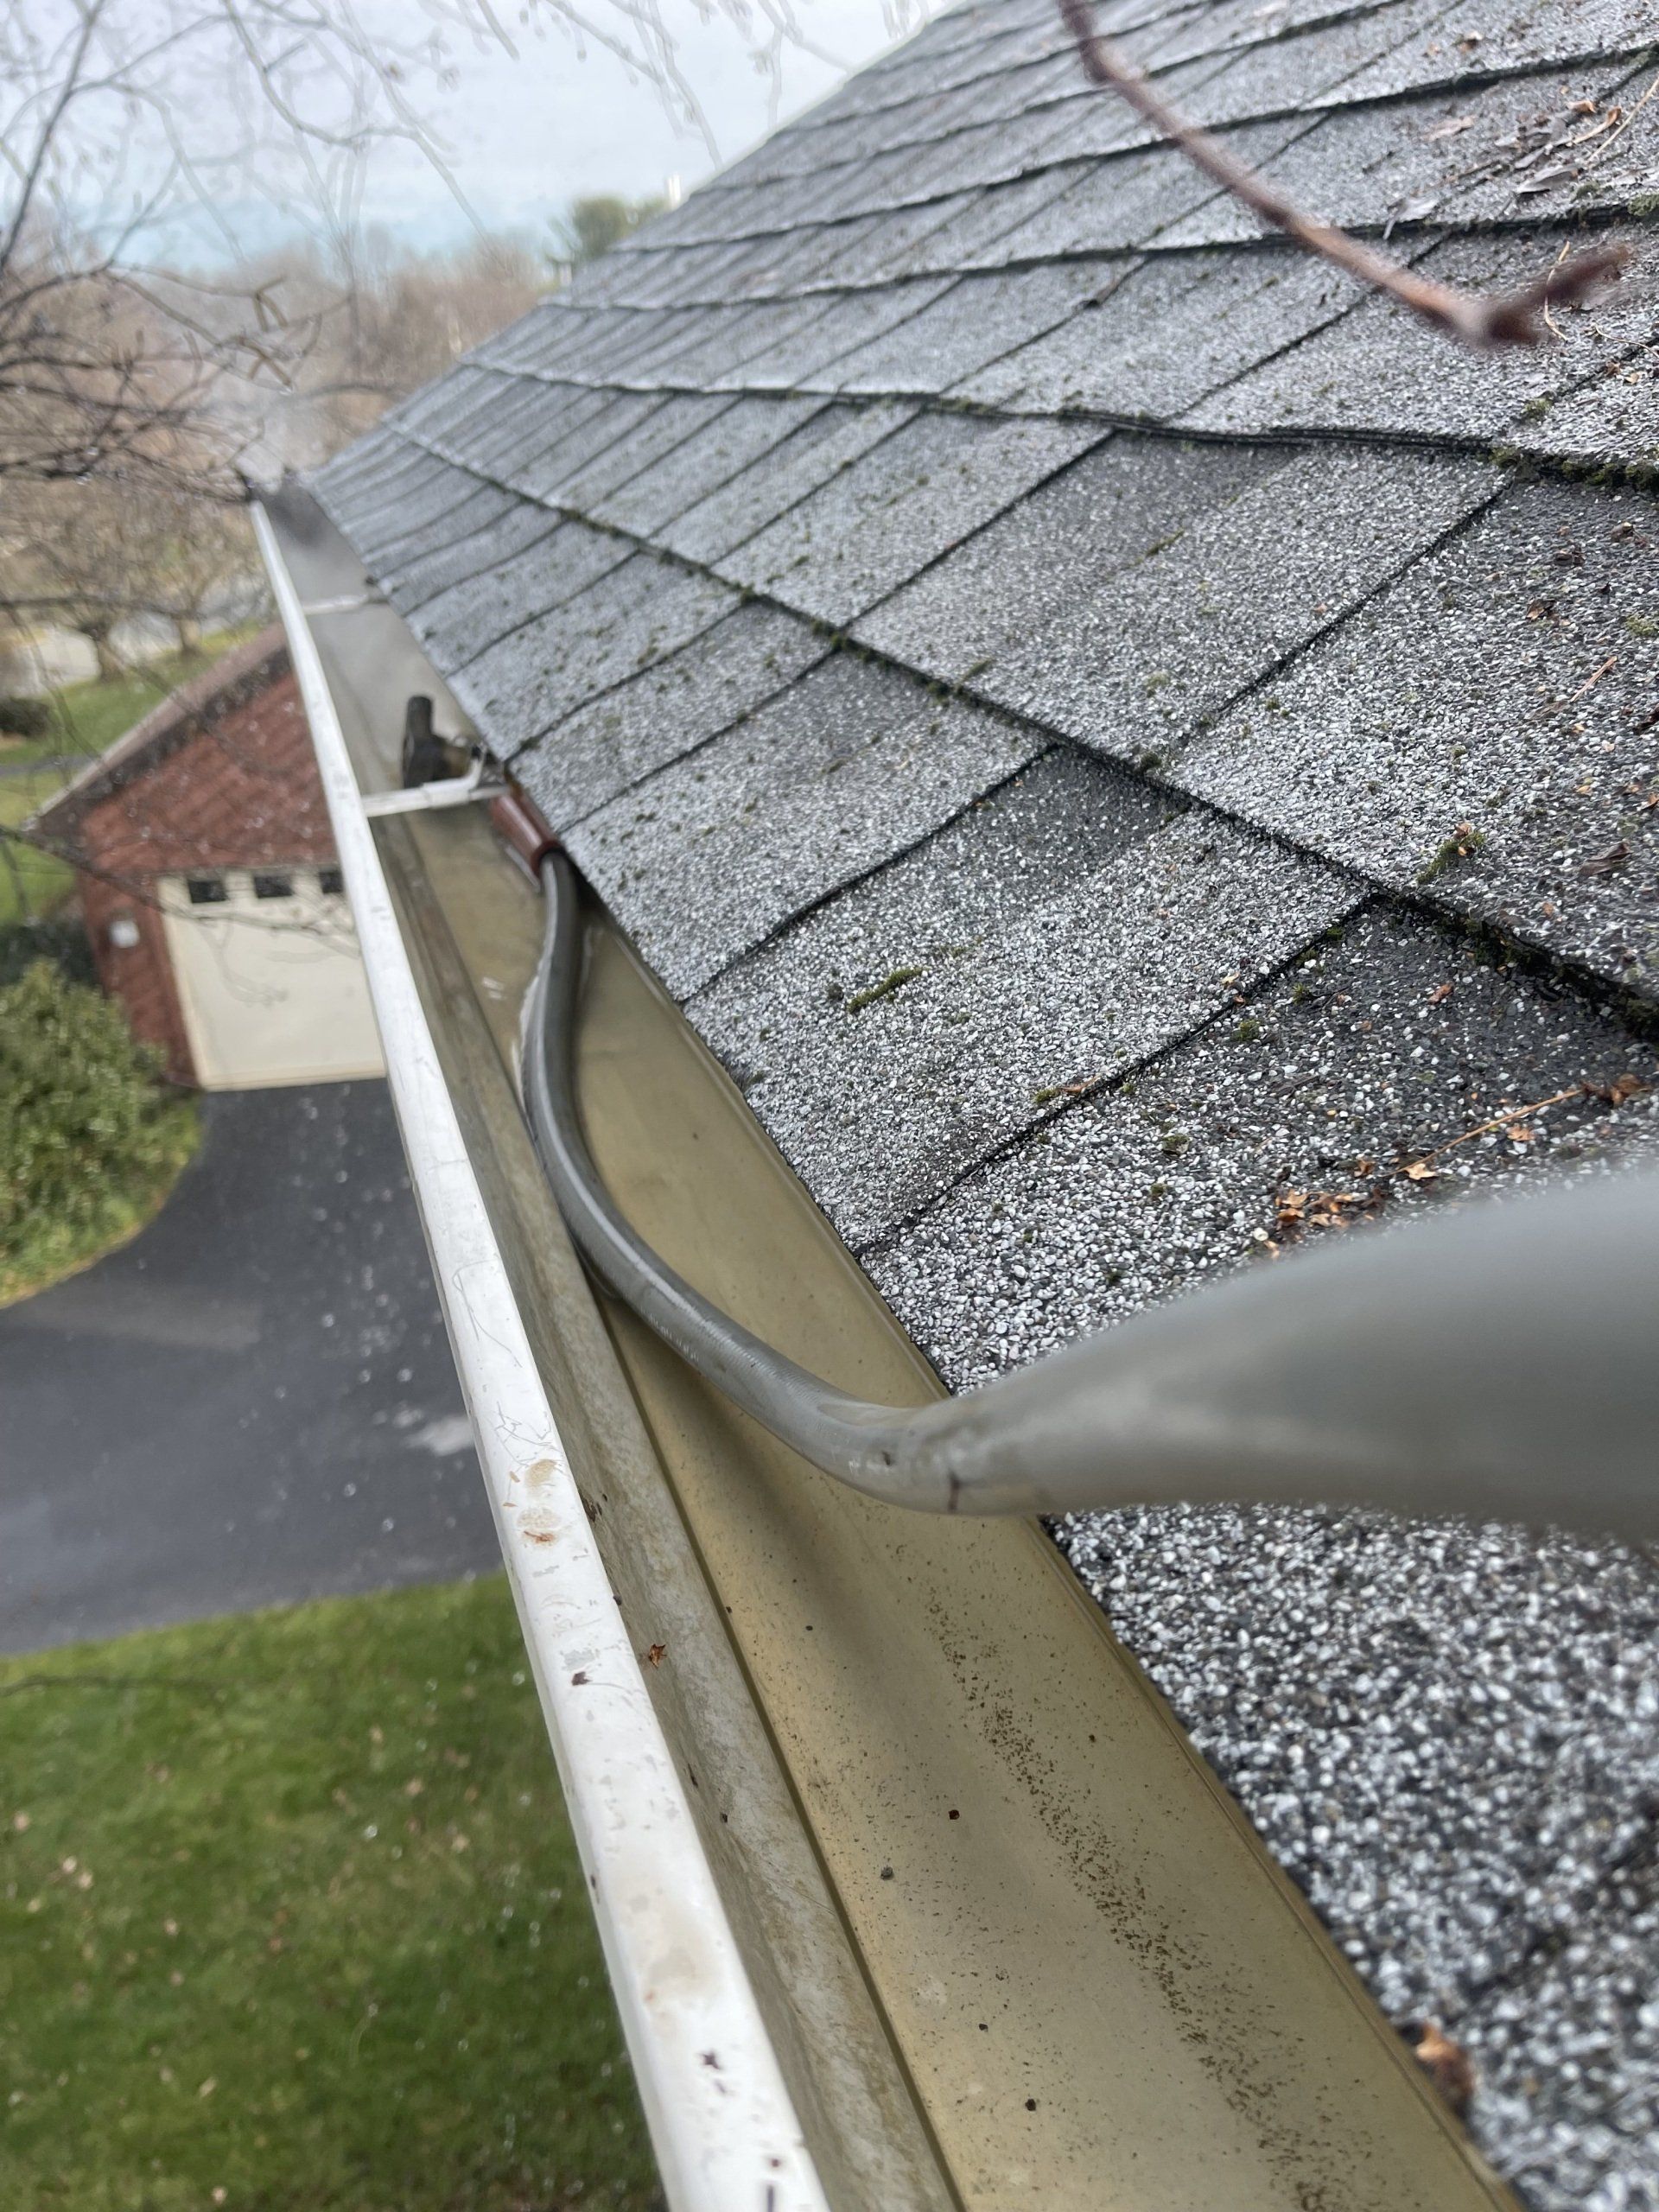 Local gutter cleaning company in Downingtown